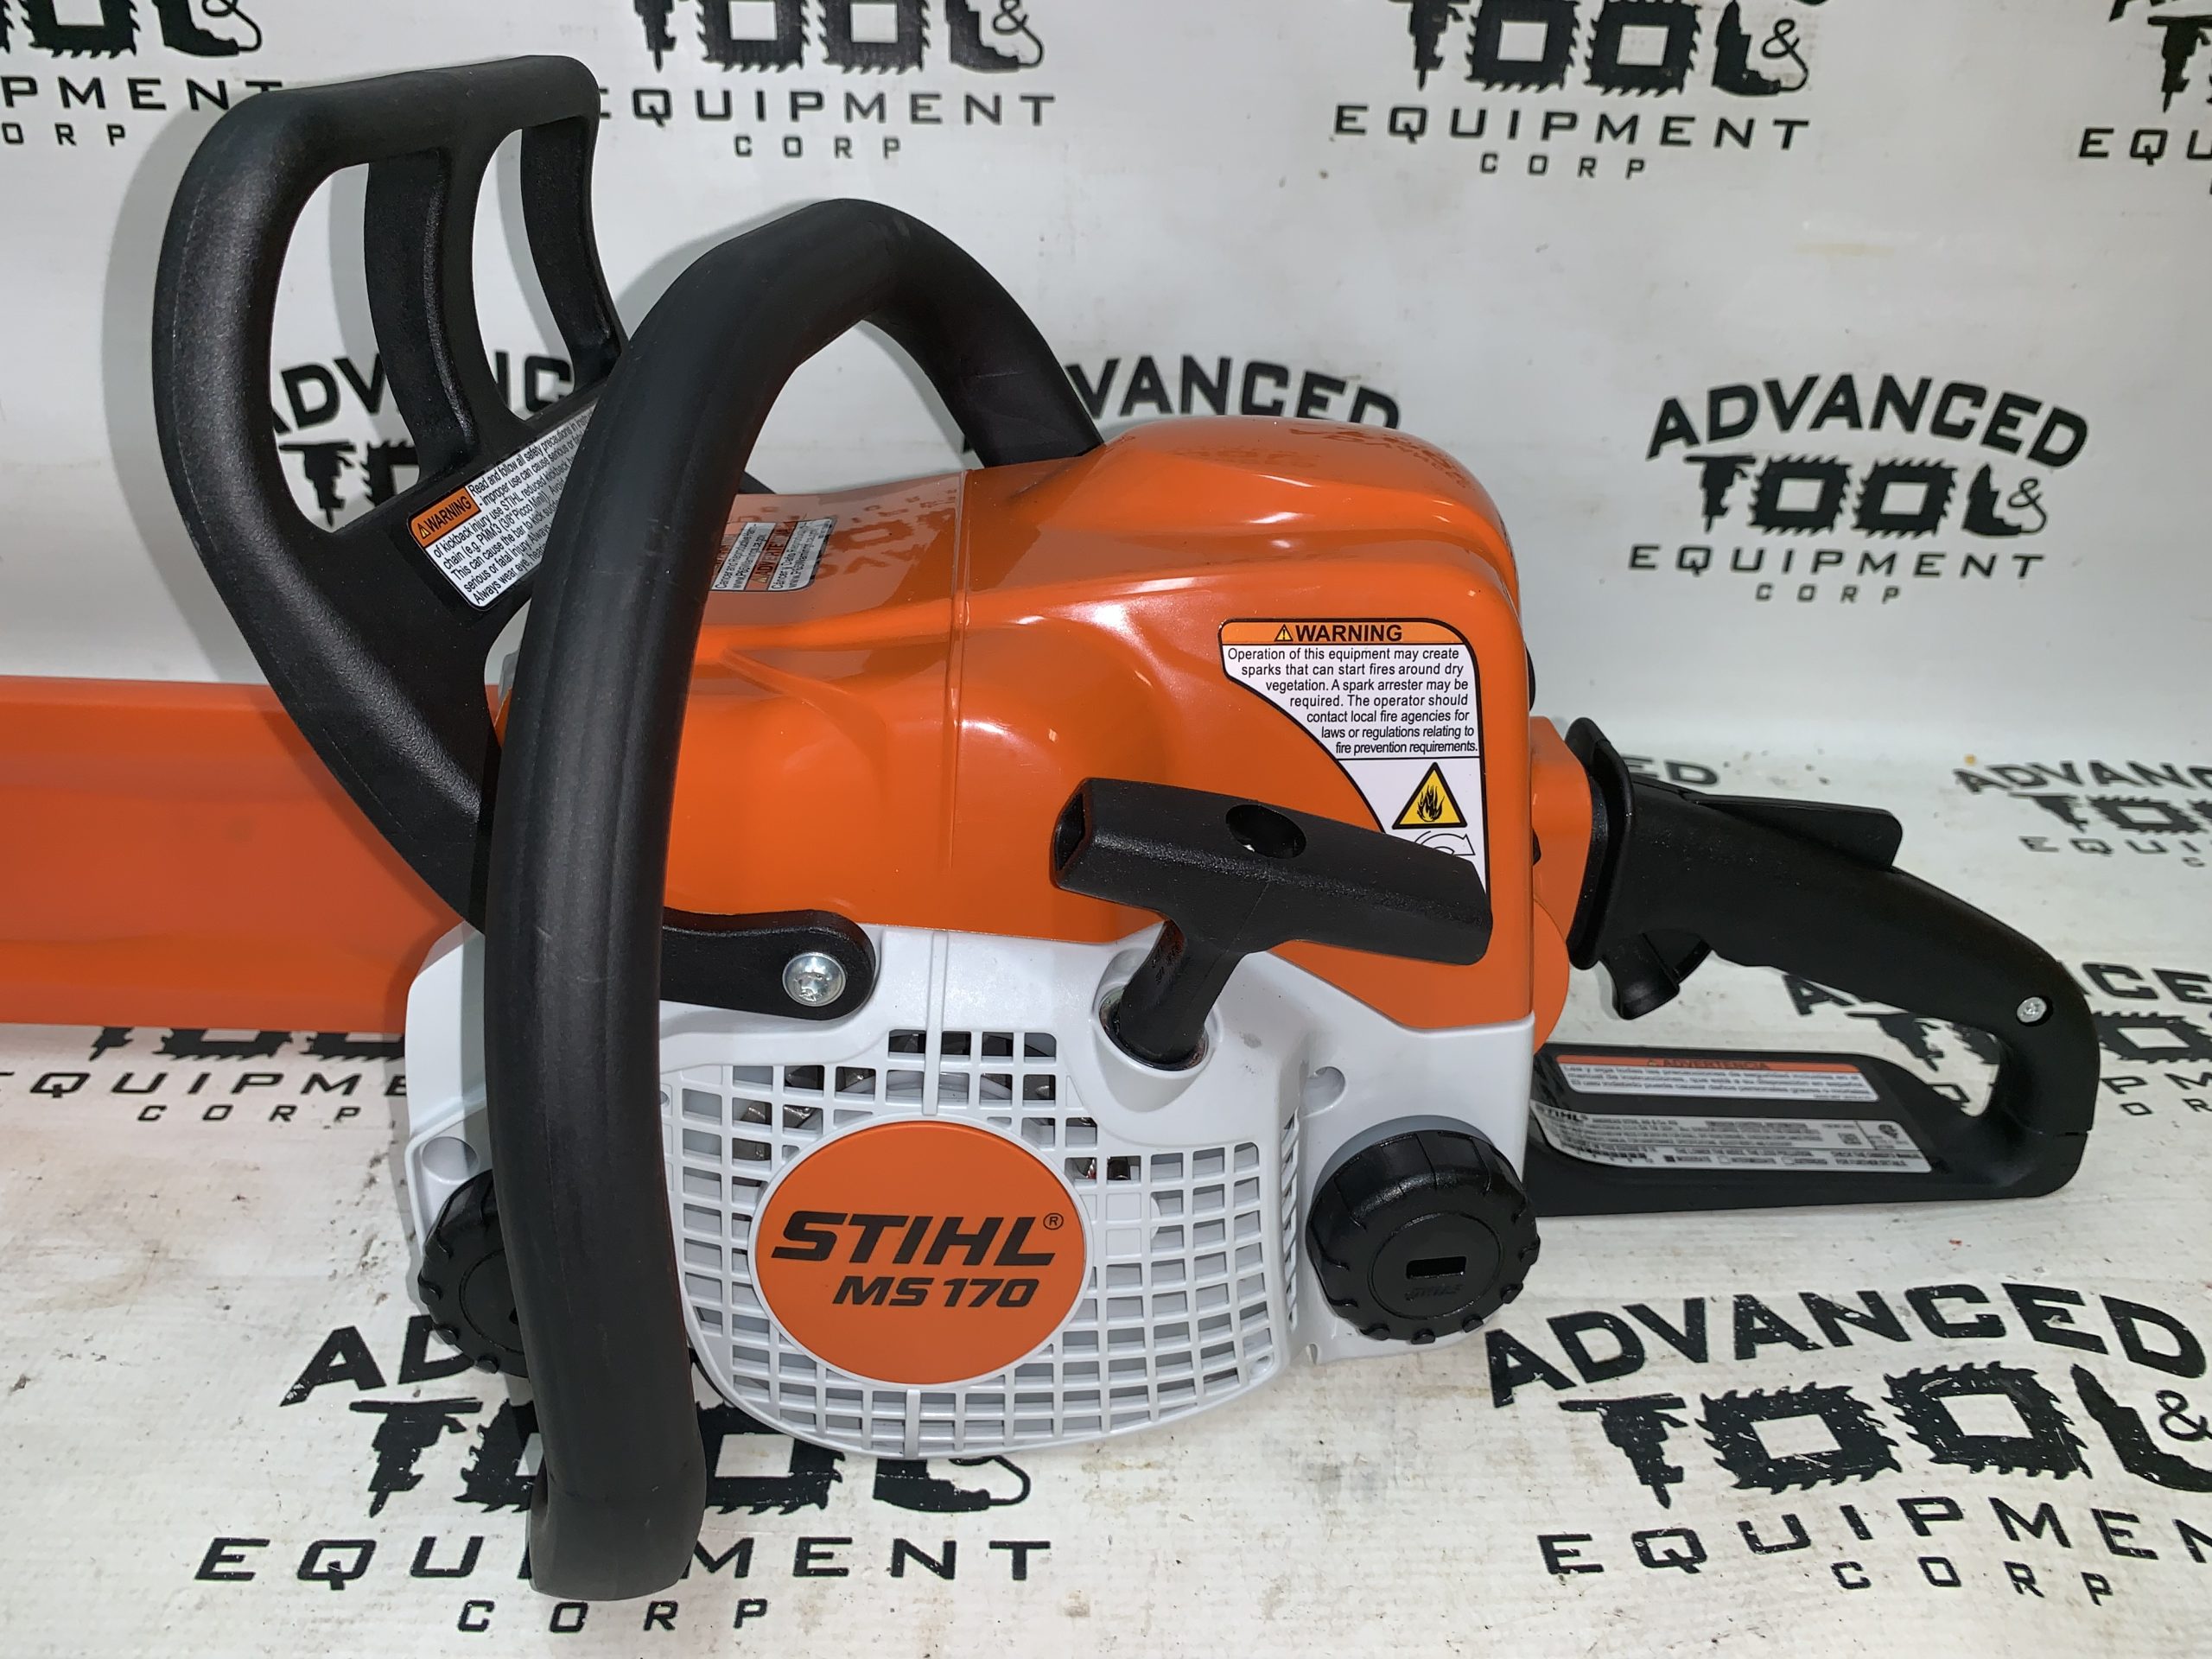 STHIL MS 170 Chainsaw 30.1cc with 16 Bar, Lawn Equipment